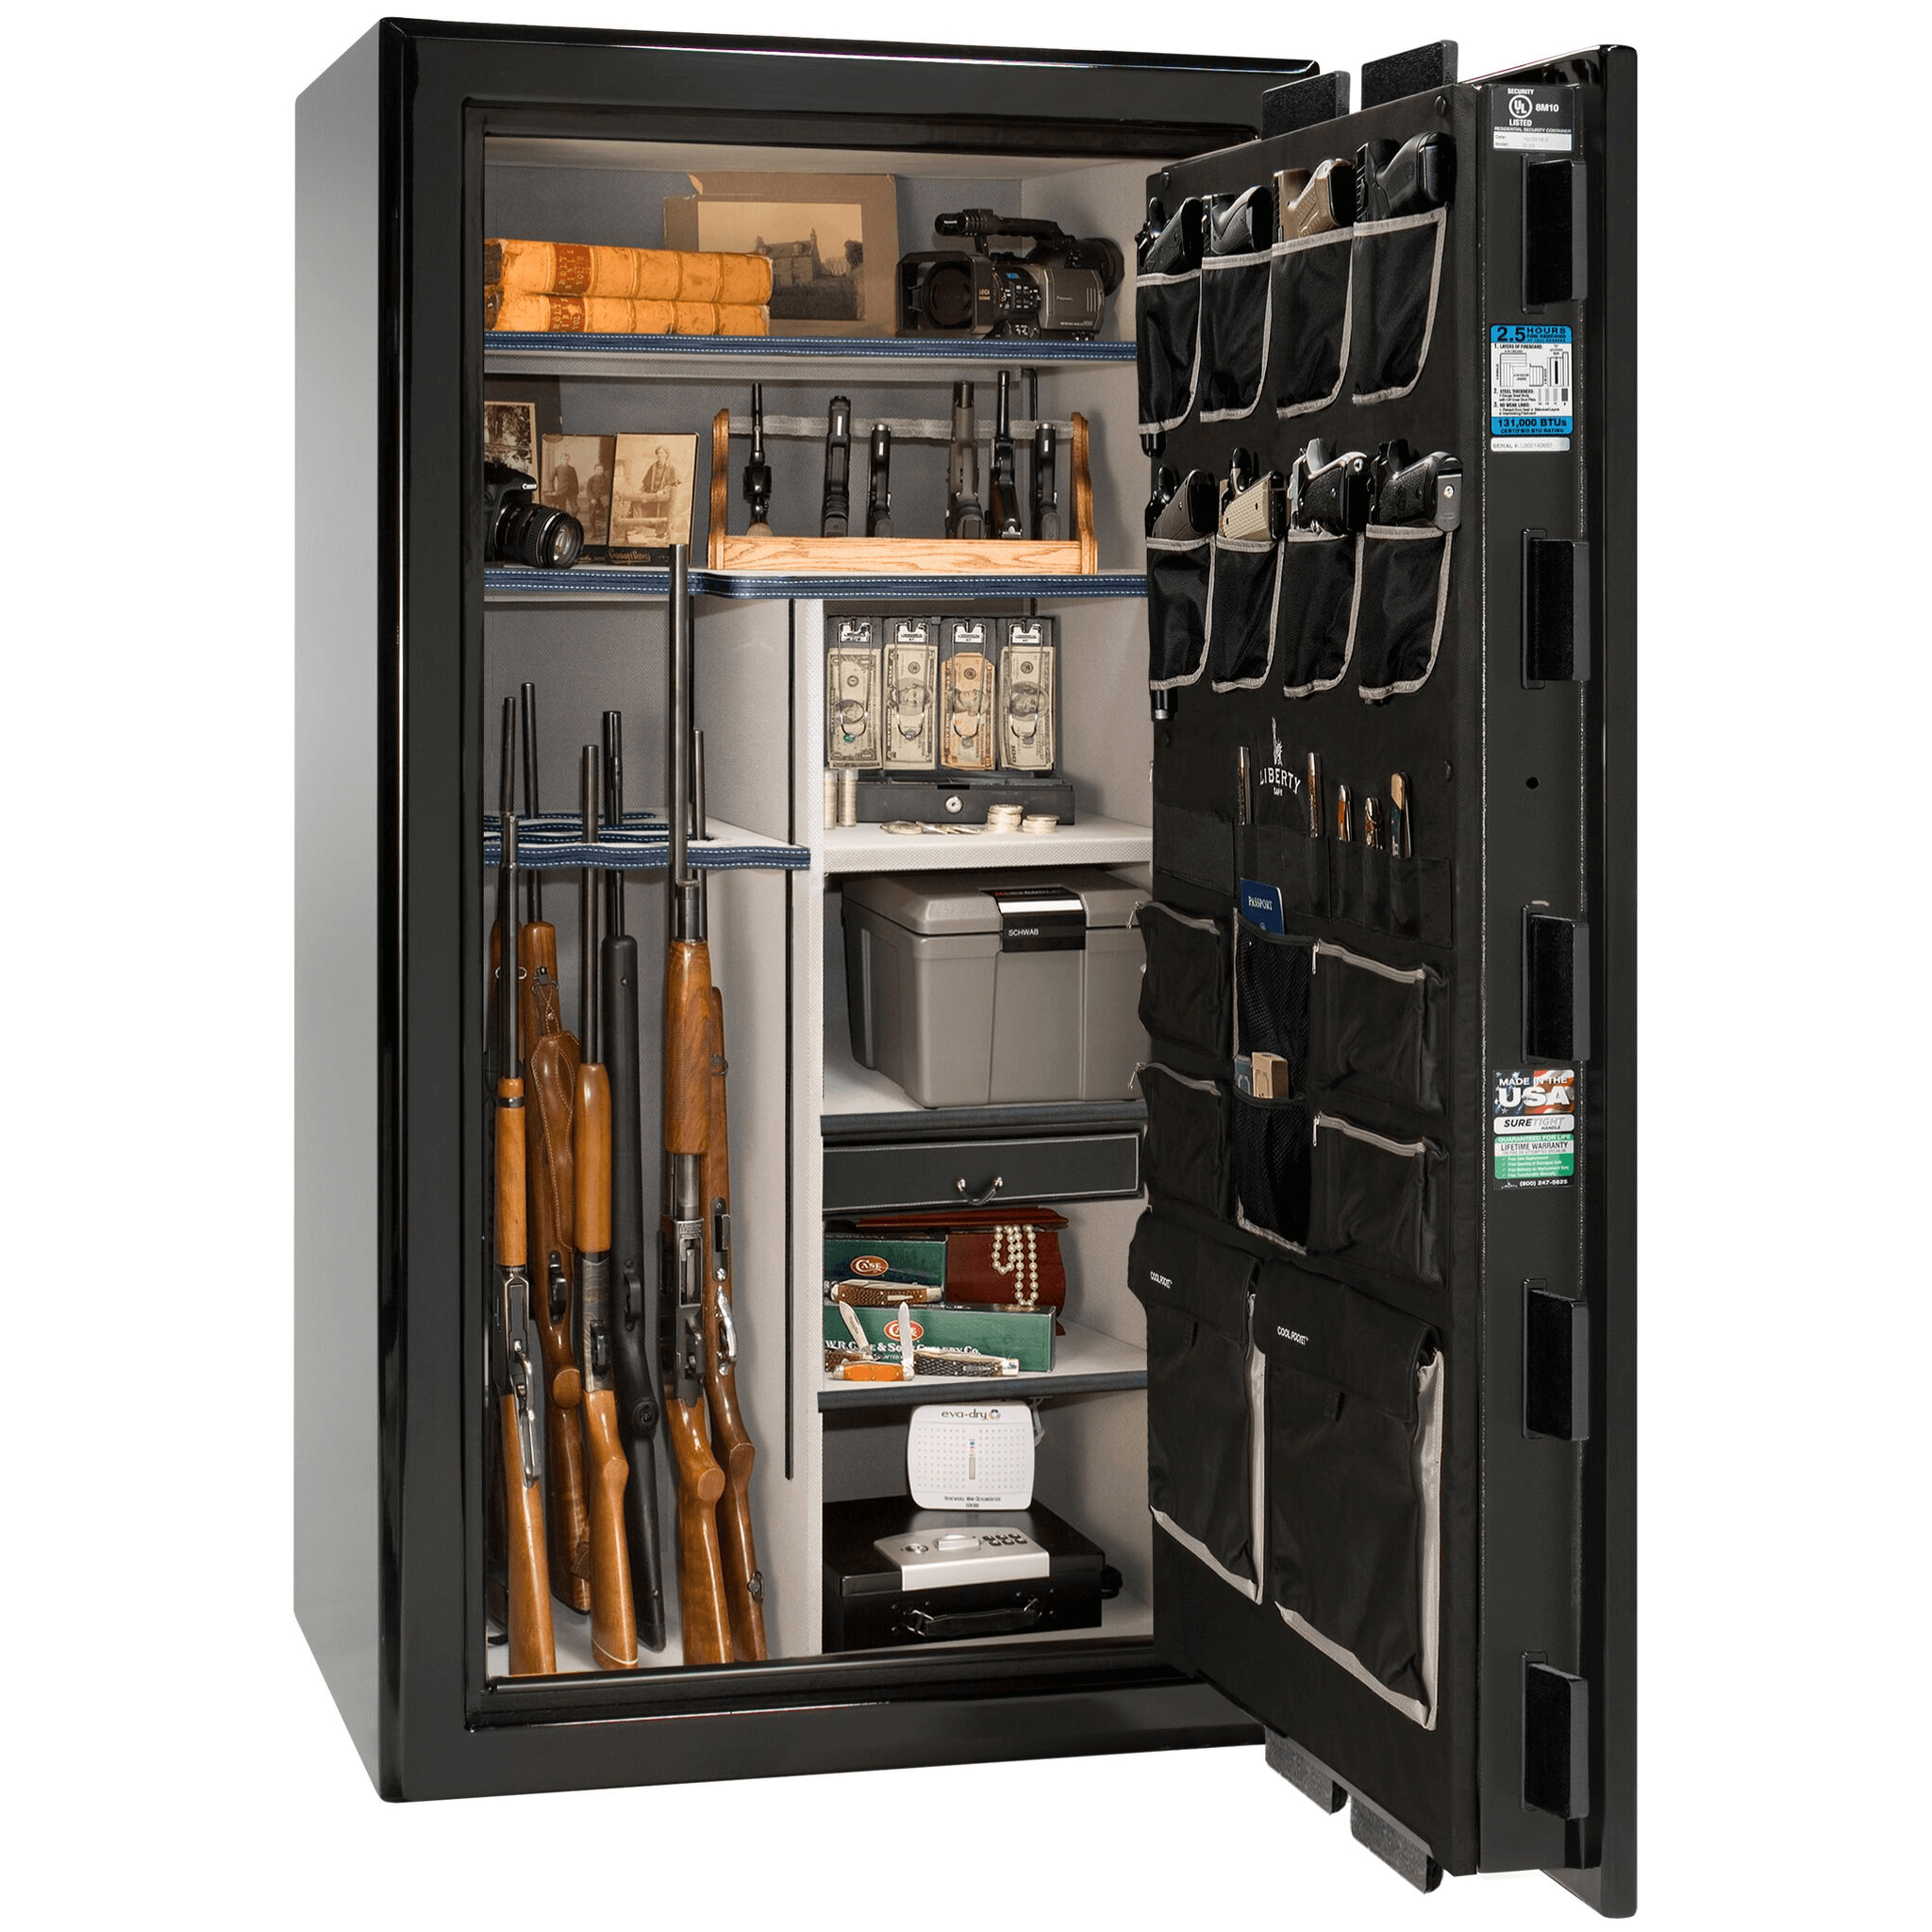 Presidential Series | Level 8 Security | 2.5 Hours Fire Protection | 40 | Dimensions: 66.5"(H) x 36.25"(W) x 32"(D) | Black Gloss | Chrome Hardware | Mechanical Lock